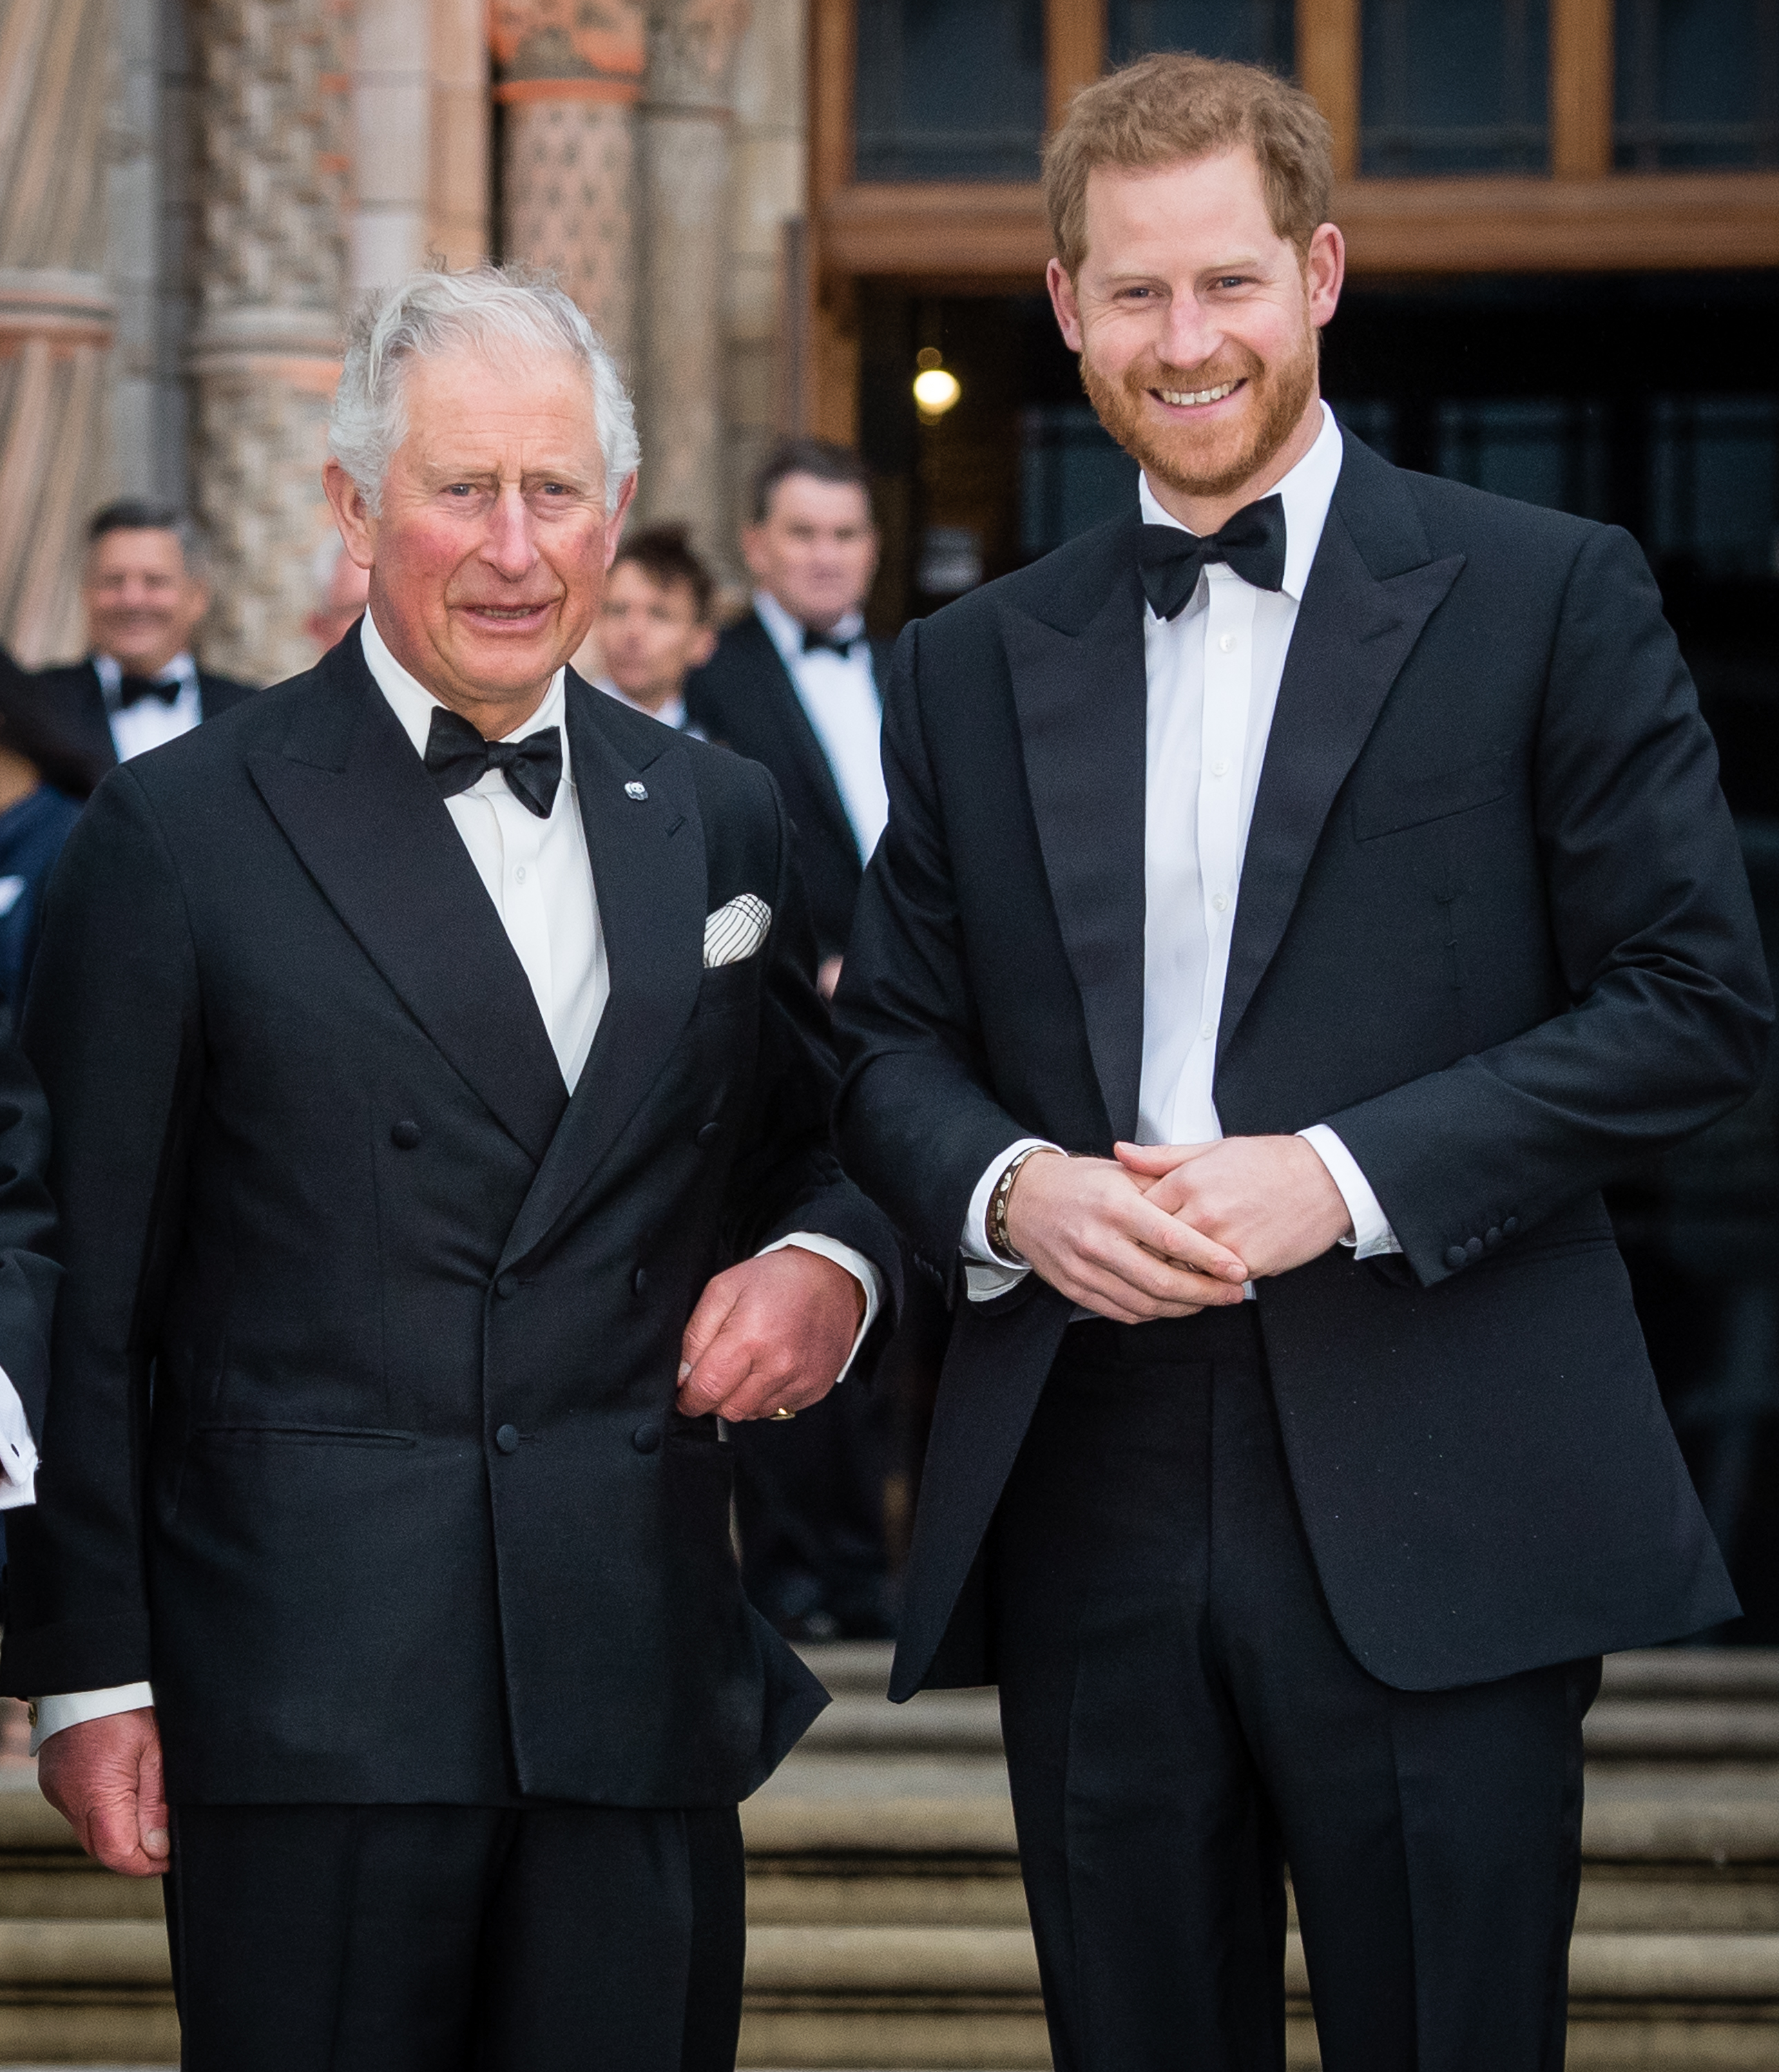 King Charles and Prince Harry attend the "Our Planet" premiere on April 04, 2019 in London, England | Source: Getty Images